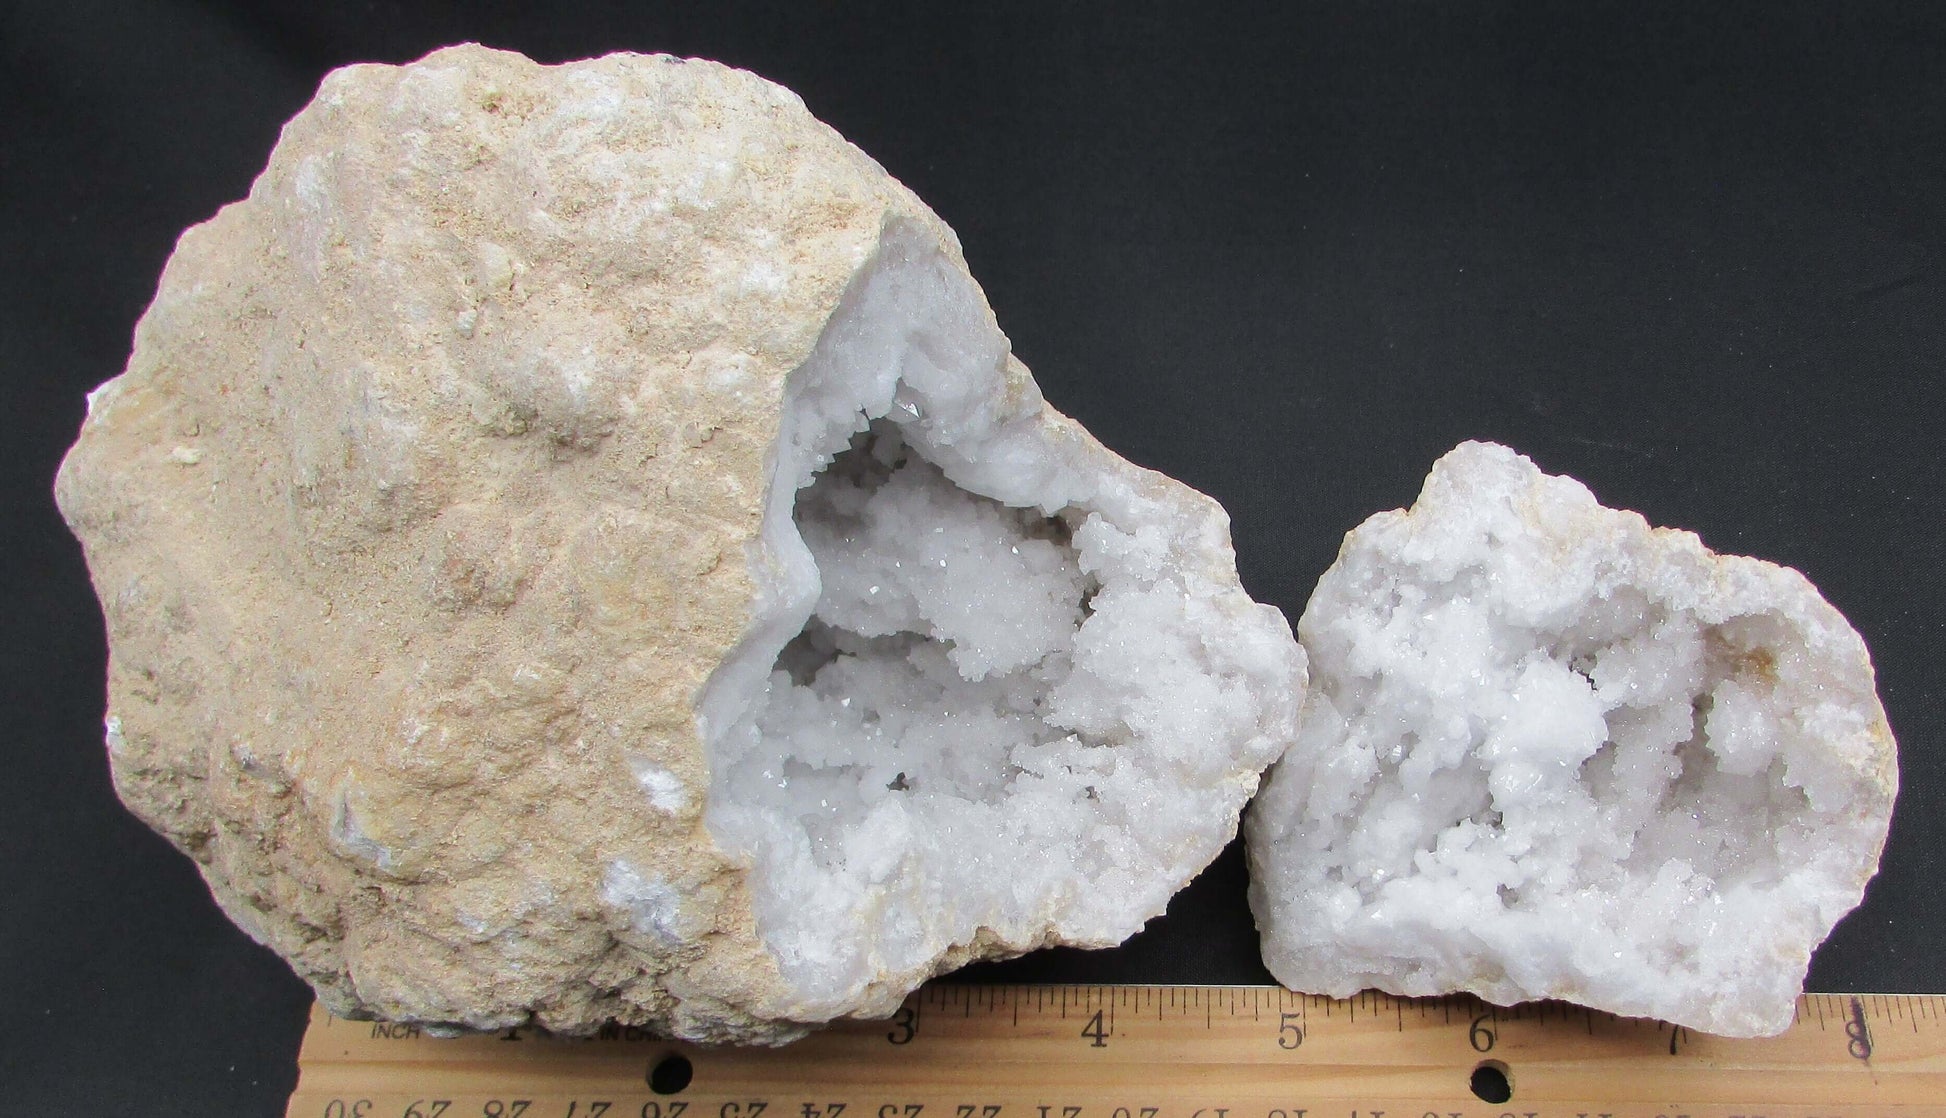 Moroccan Snow White Quartz Druzy Geode ethically sourced from morocco whole geode